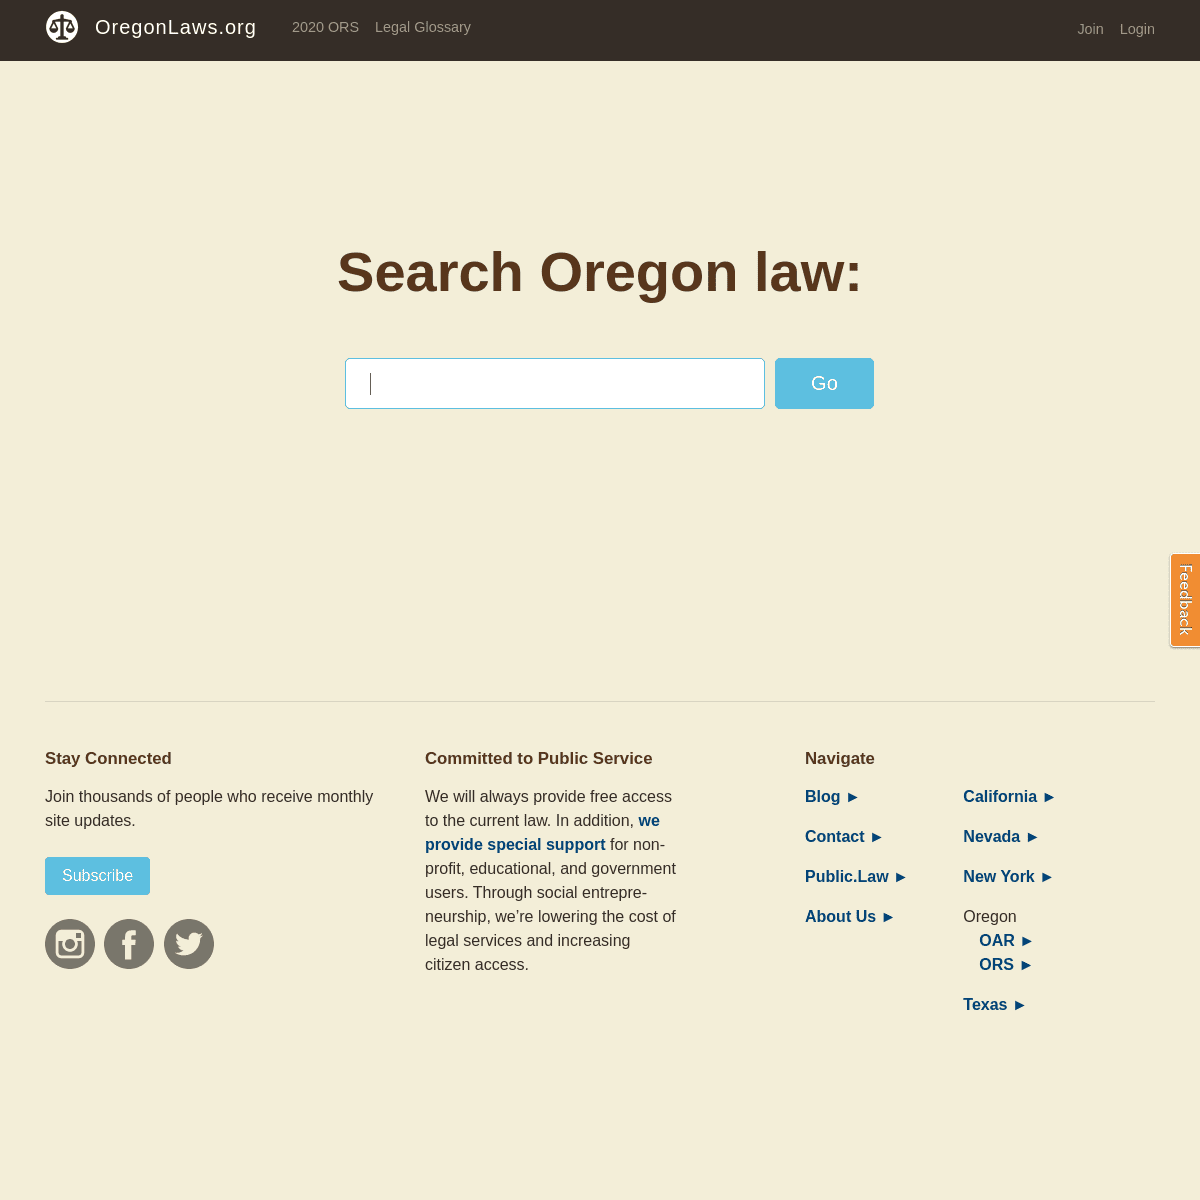 A complete backup of https://www.oregonlaws.org/